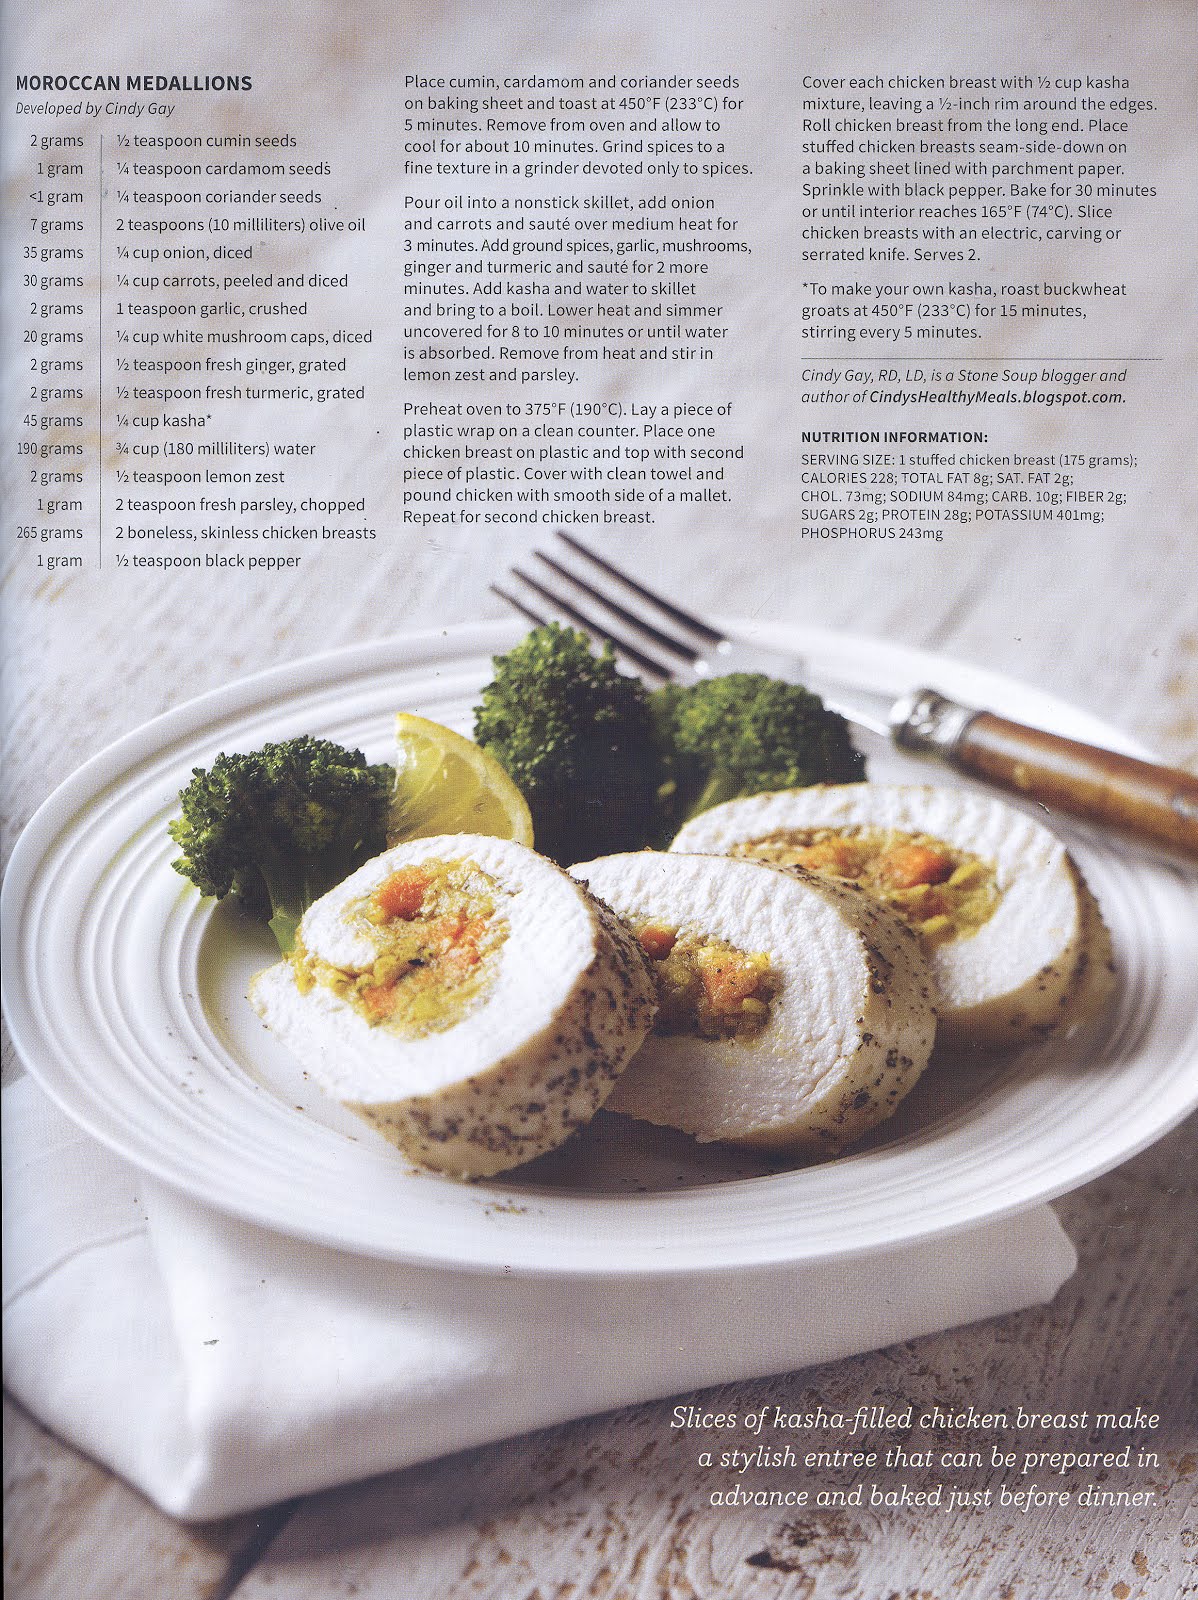 Published in Food & Nutrition Magazine